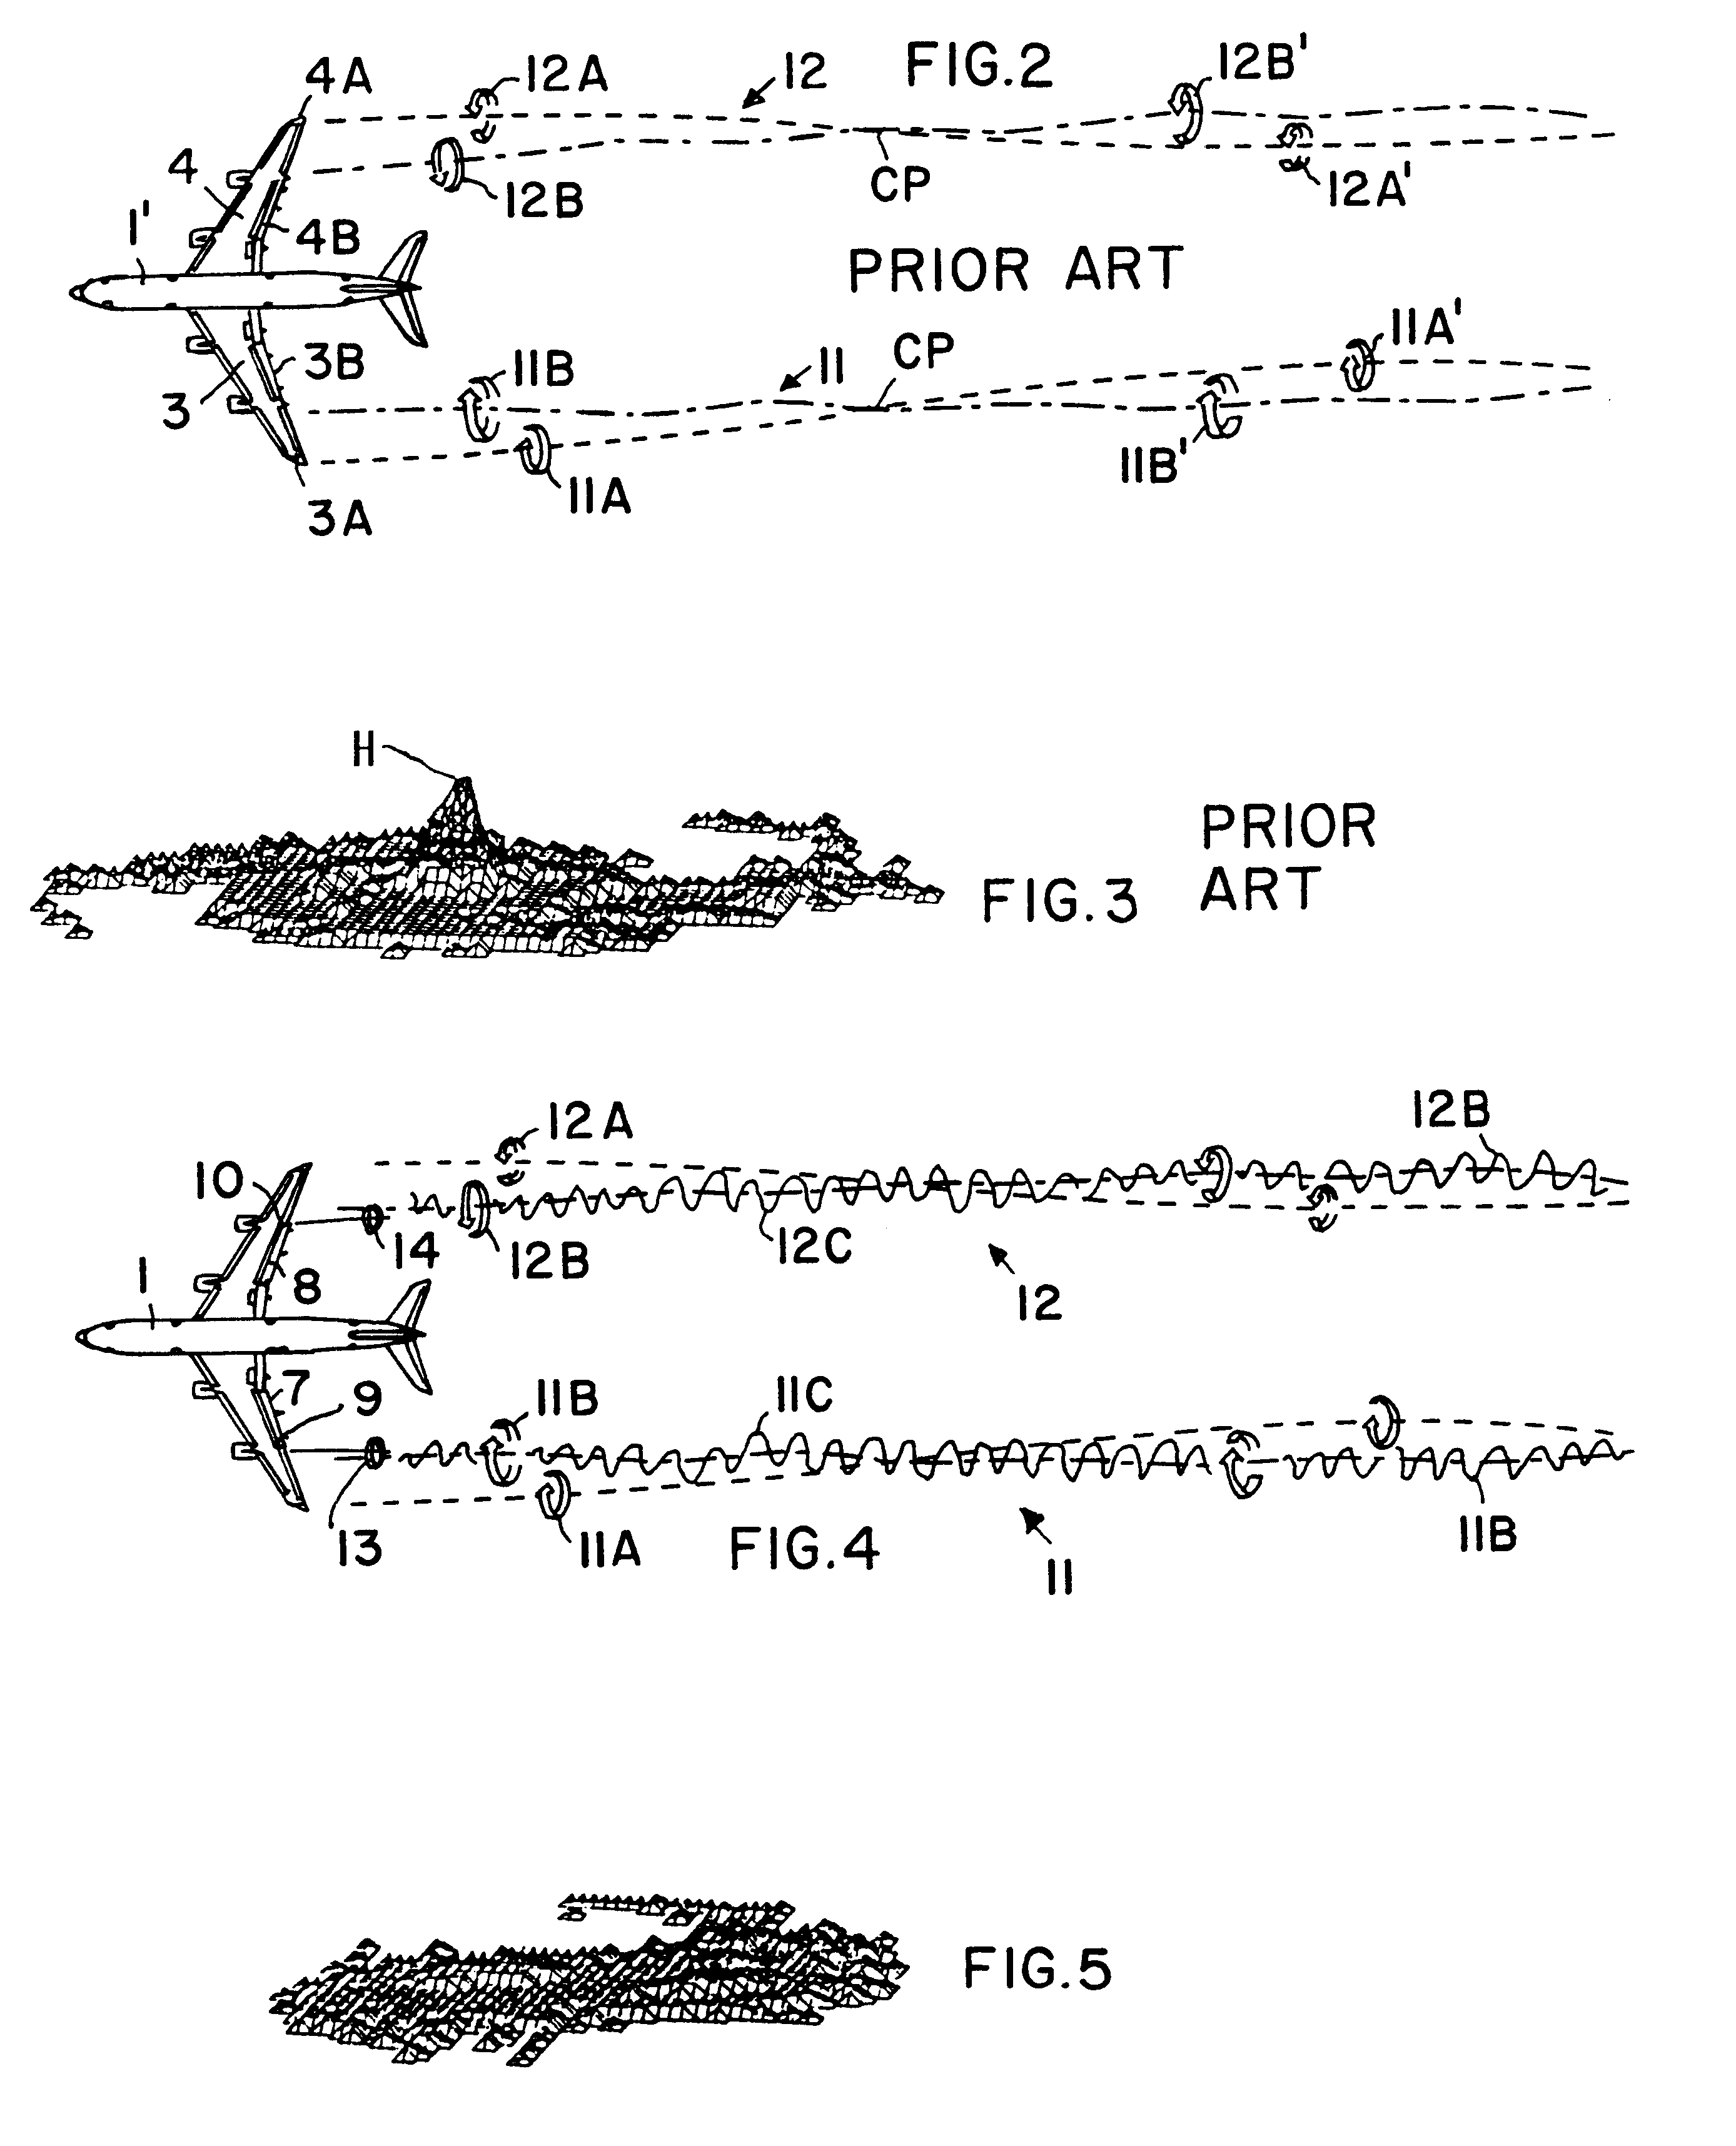 Method and apparatus for reducing trailing vortices in the wake of an aircraft